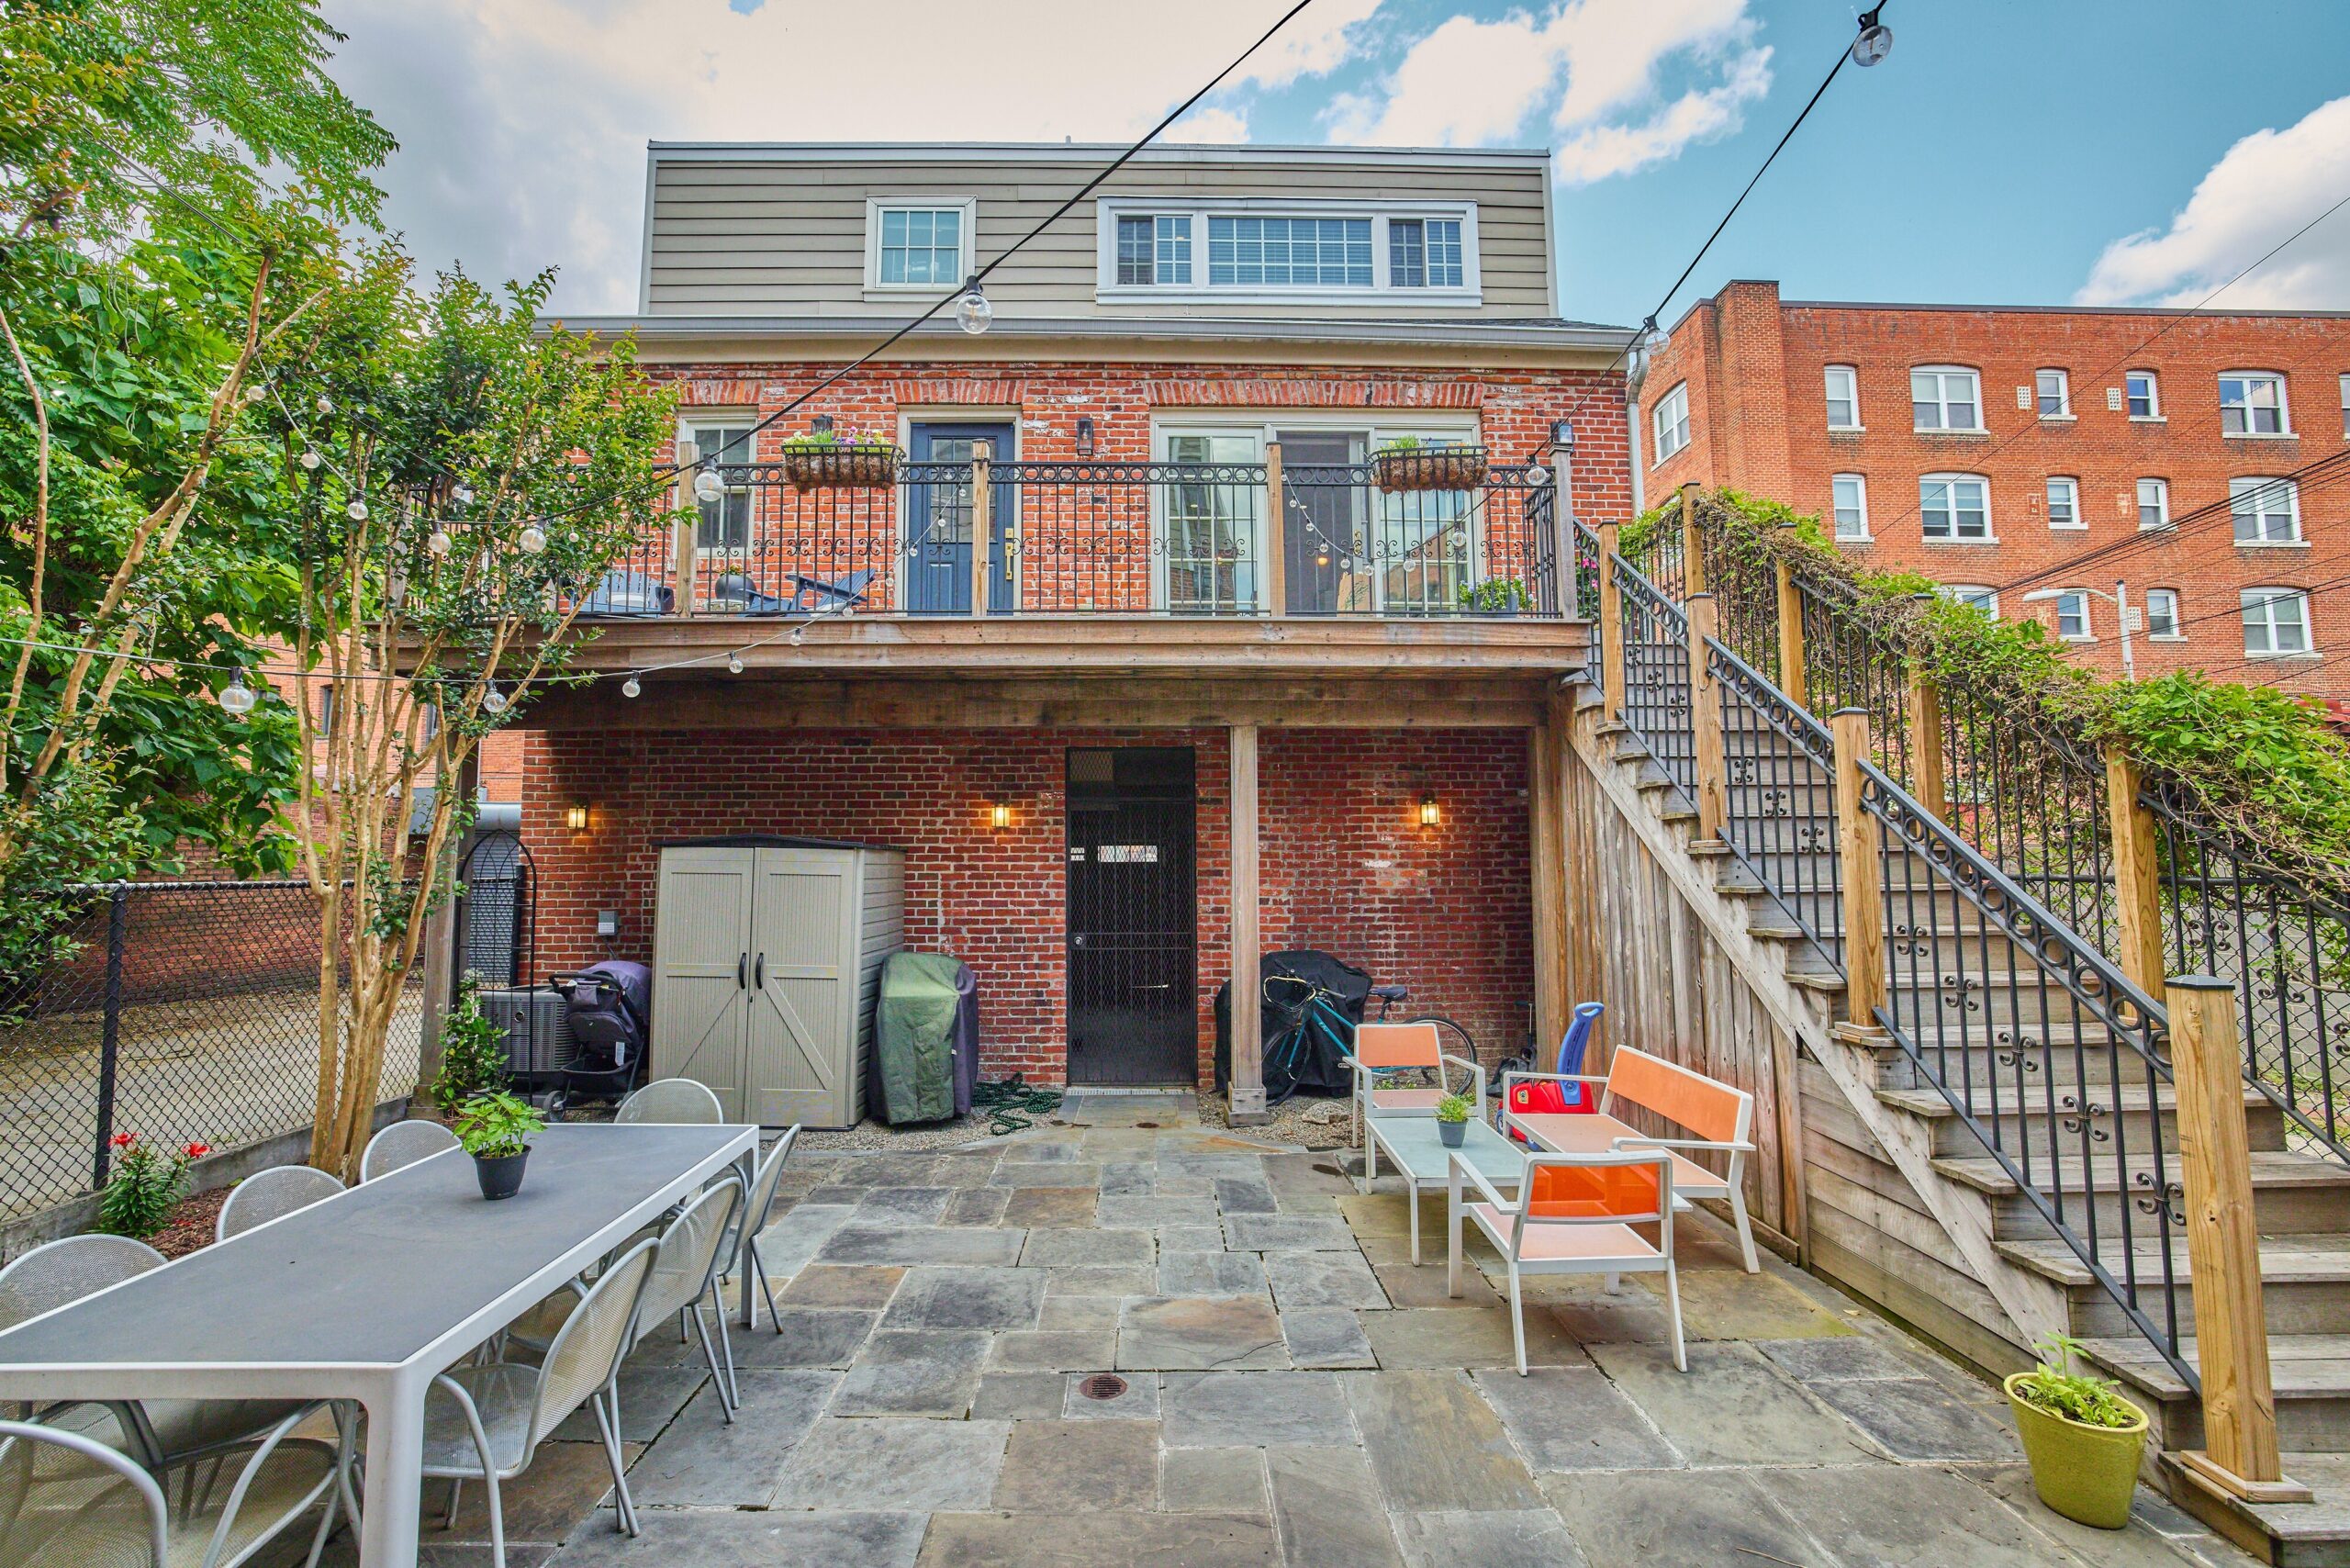 Professional exterior photo of 1459 Harvard St NW #6 - showing the rear of the building where the entrance to #6 is. Expansive stone patio with storage area, and staircase up to balcony where the entrance is.